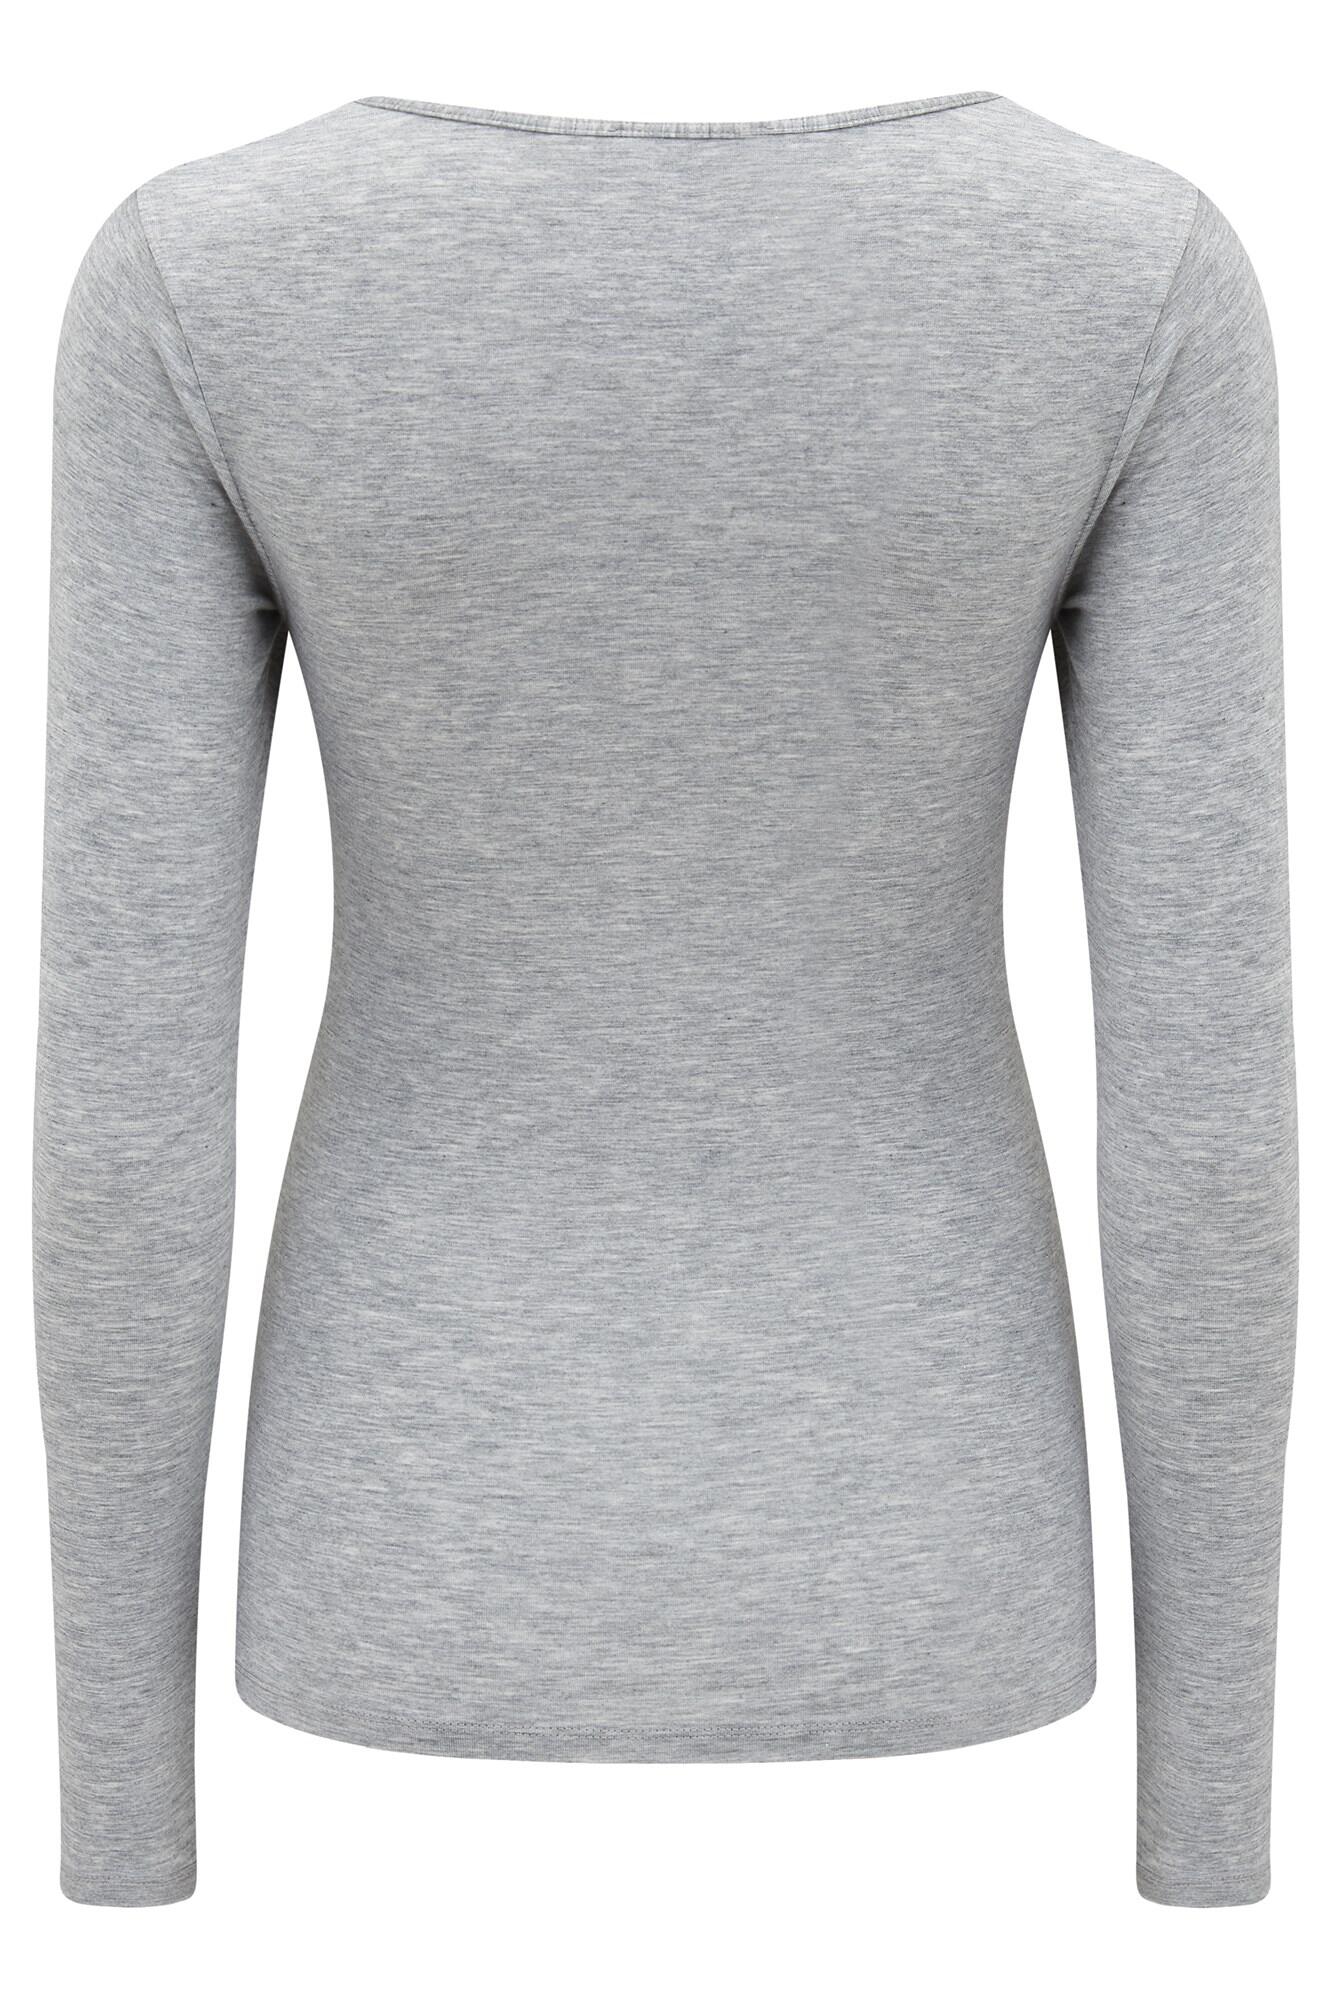 CHARNOS Womens Second Skin Thermalwear Long Sleeve Top 58236 Grey 